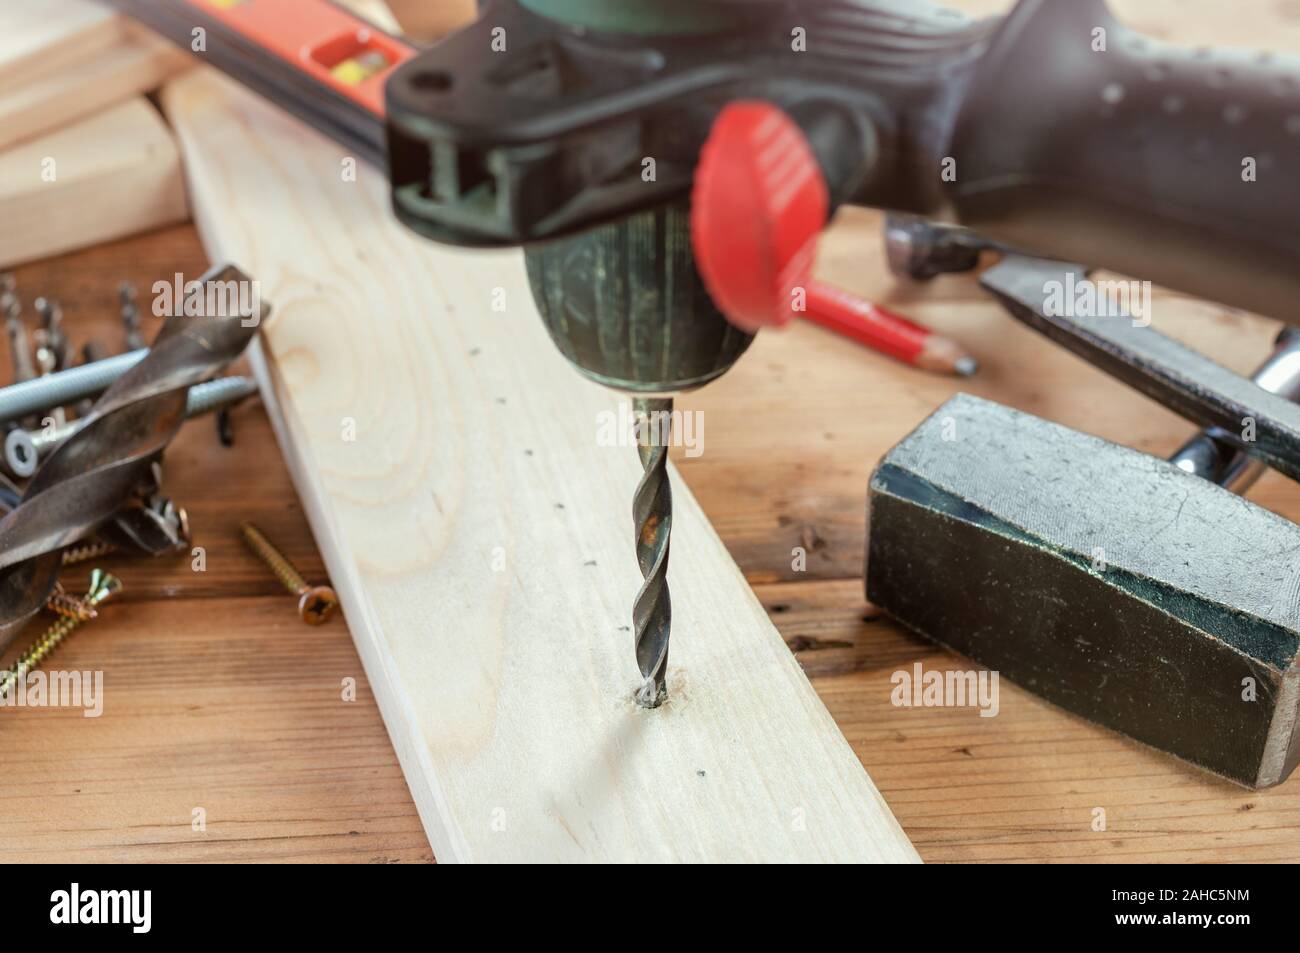 Drill work. Making hole into the wood with drill bit Stock Photo